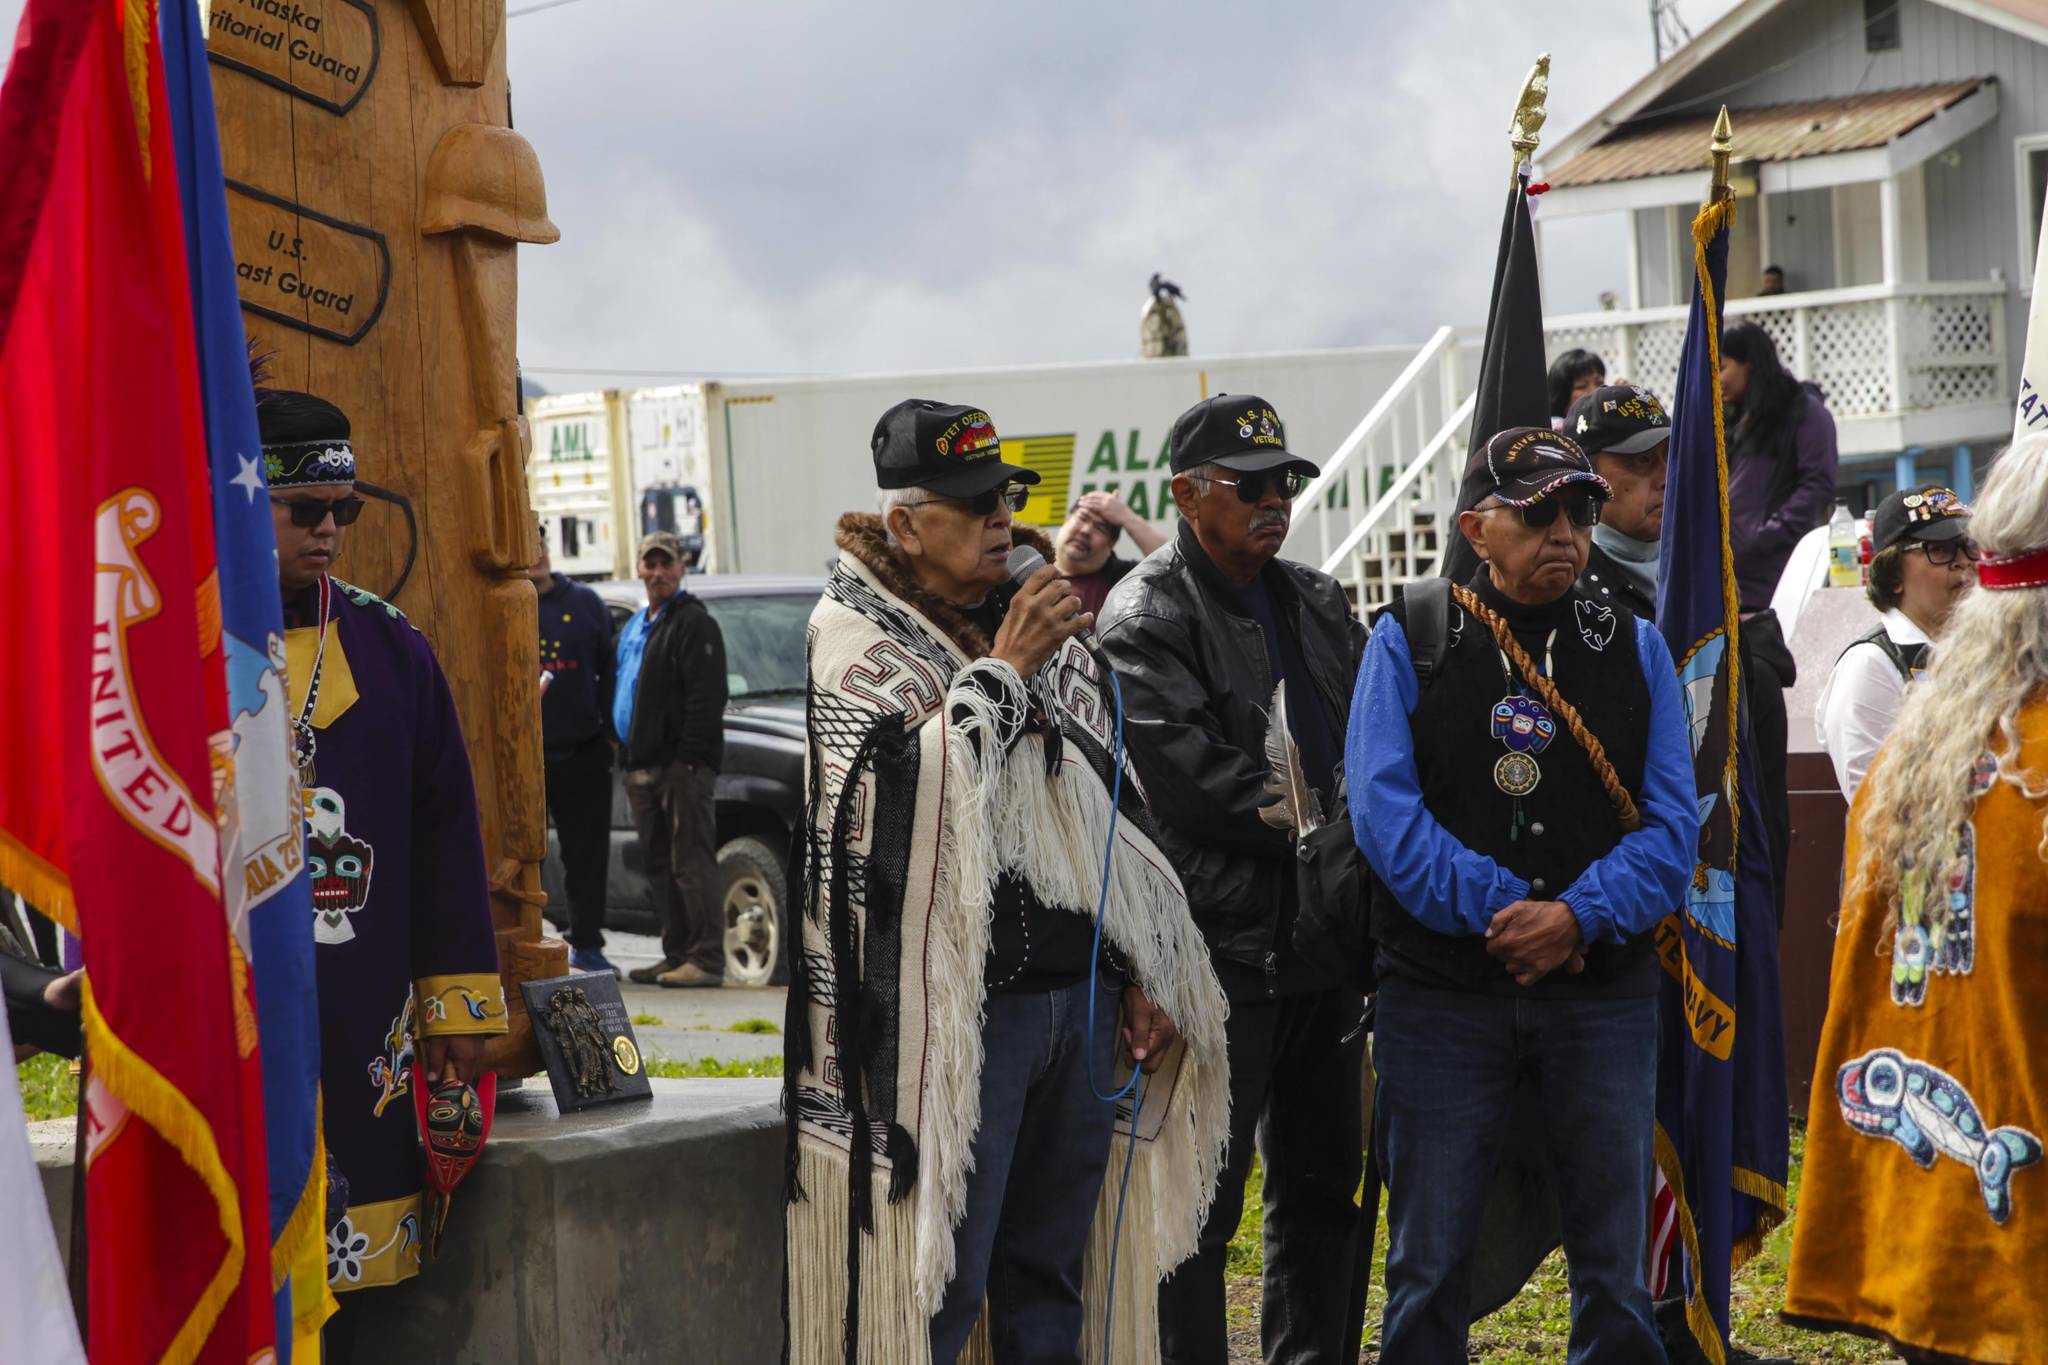 George Bennett Sr., a Vietnam veteran, speaks during a ceremony for the raising of a totem pole honoring veterans of the armed services in Hoonah on July 24, 2021. (Michael S. Lockett / Juneau Empire)